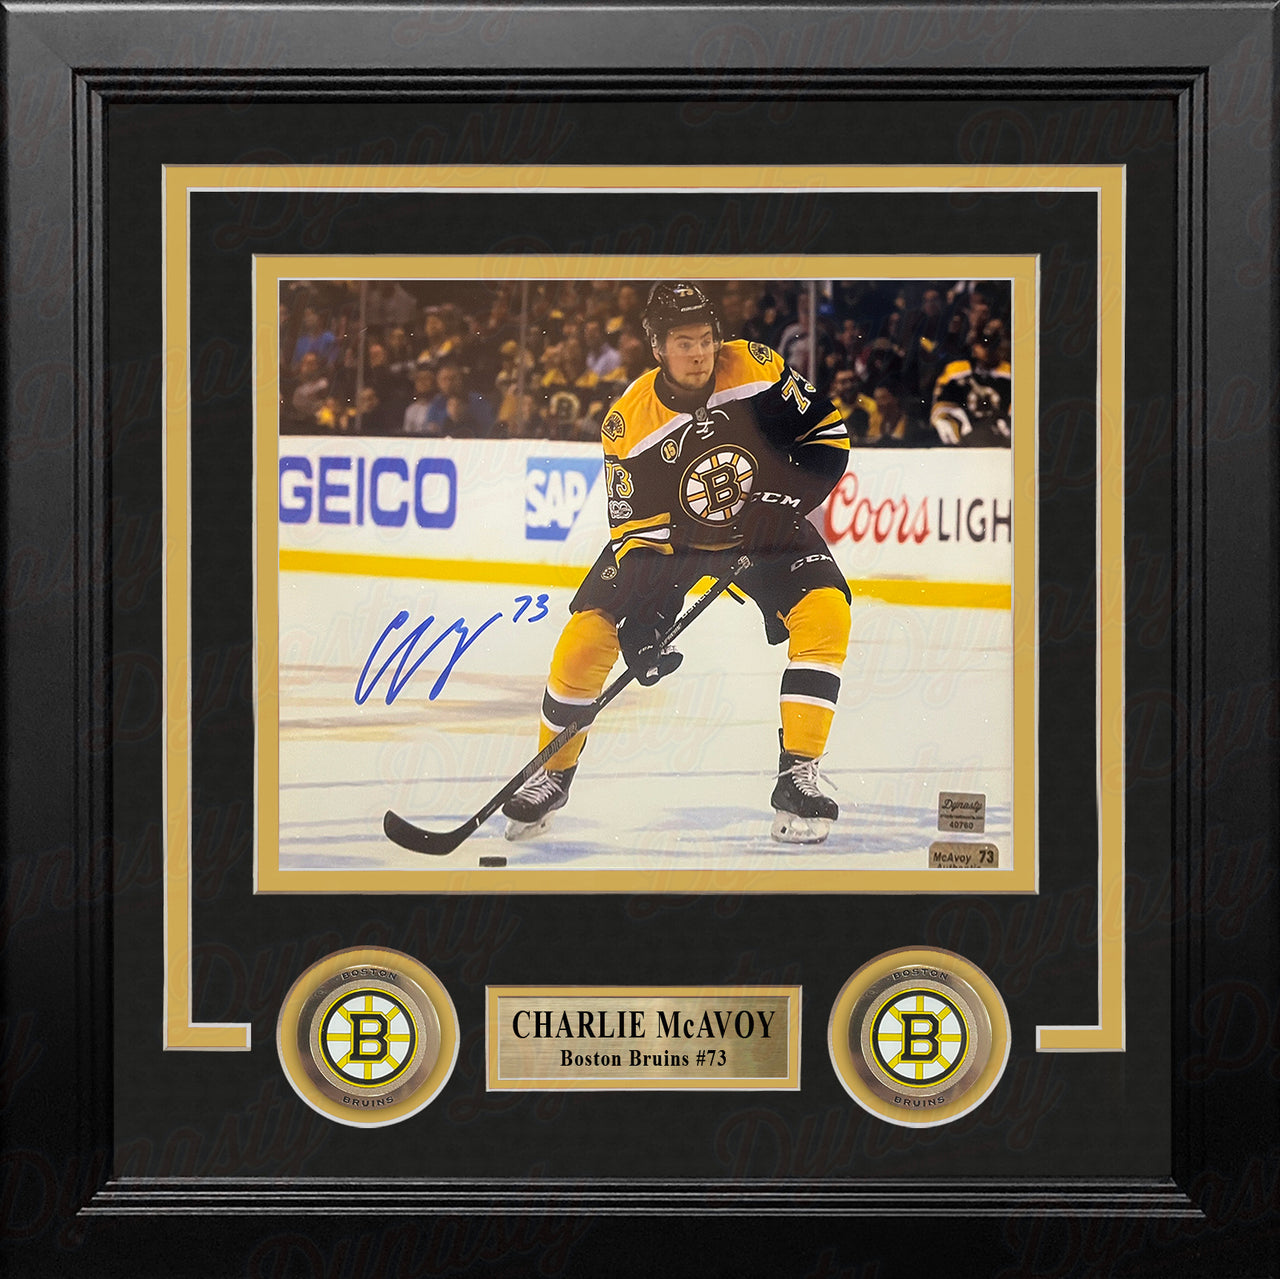 Charlie McAvoy in Action Boston Bruins Autographed 8" x 10" Framed Hockey Photo